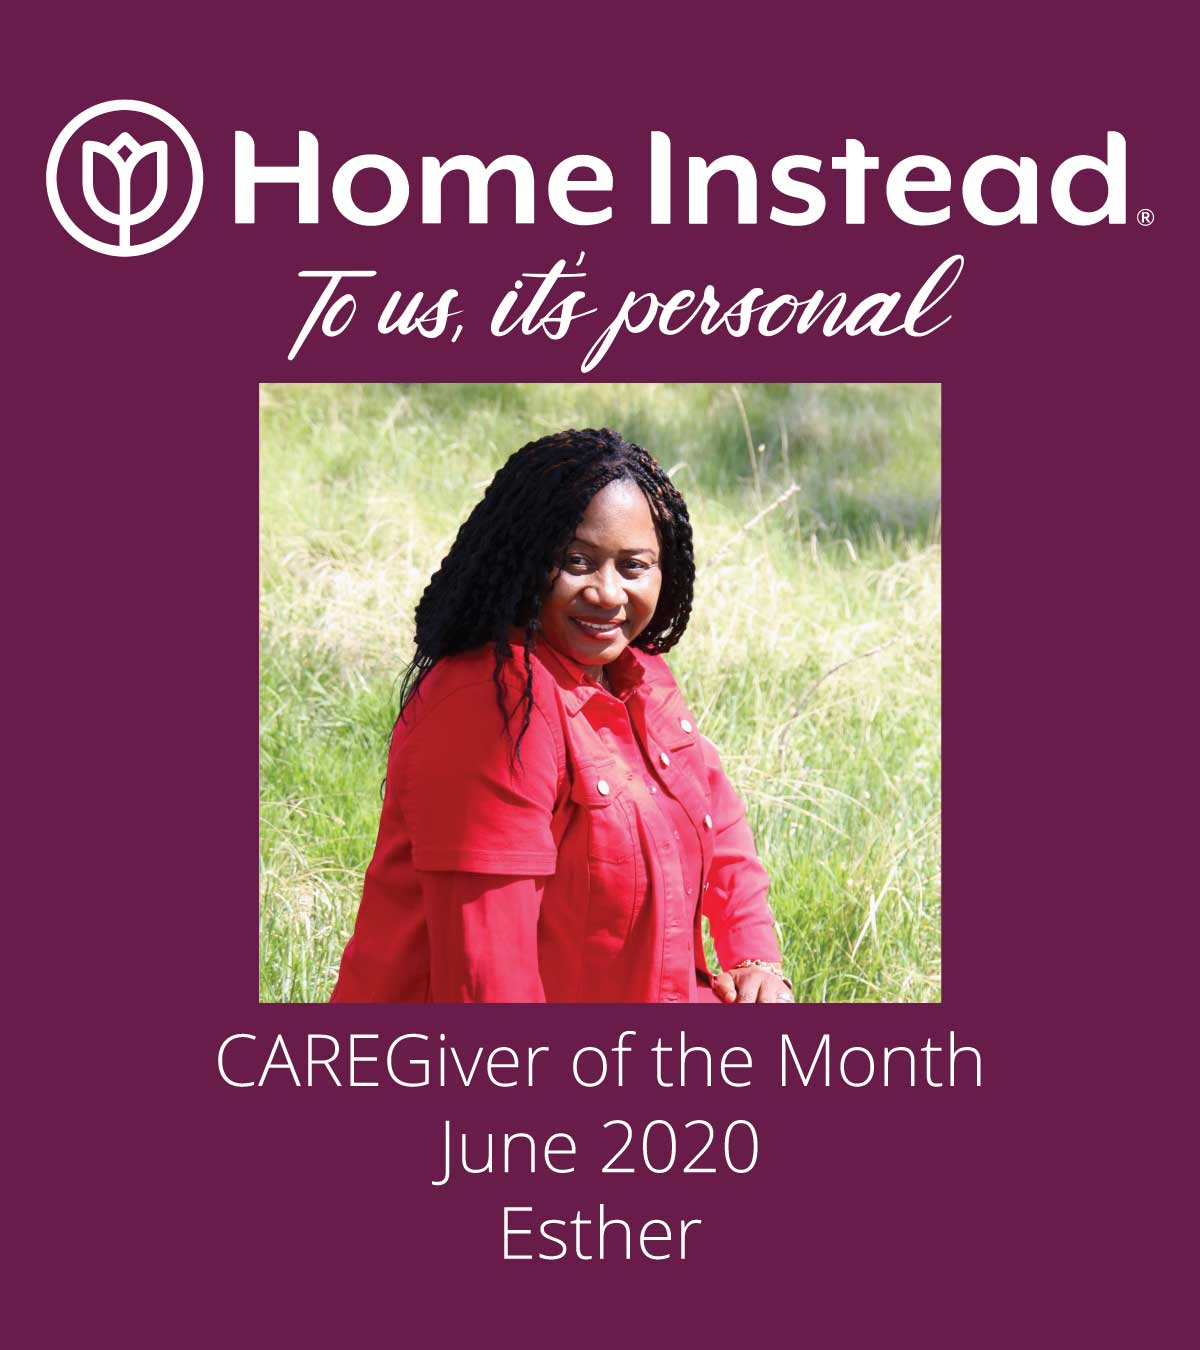 Home Instead Caregiver of the Month Esther